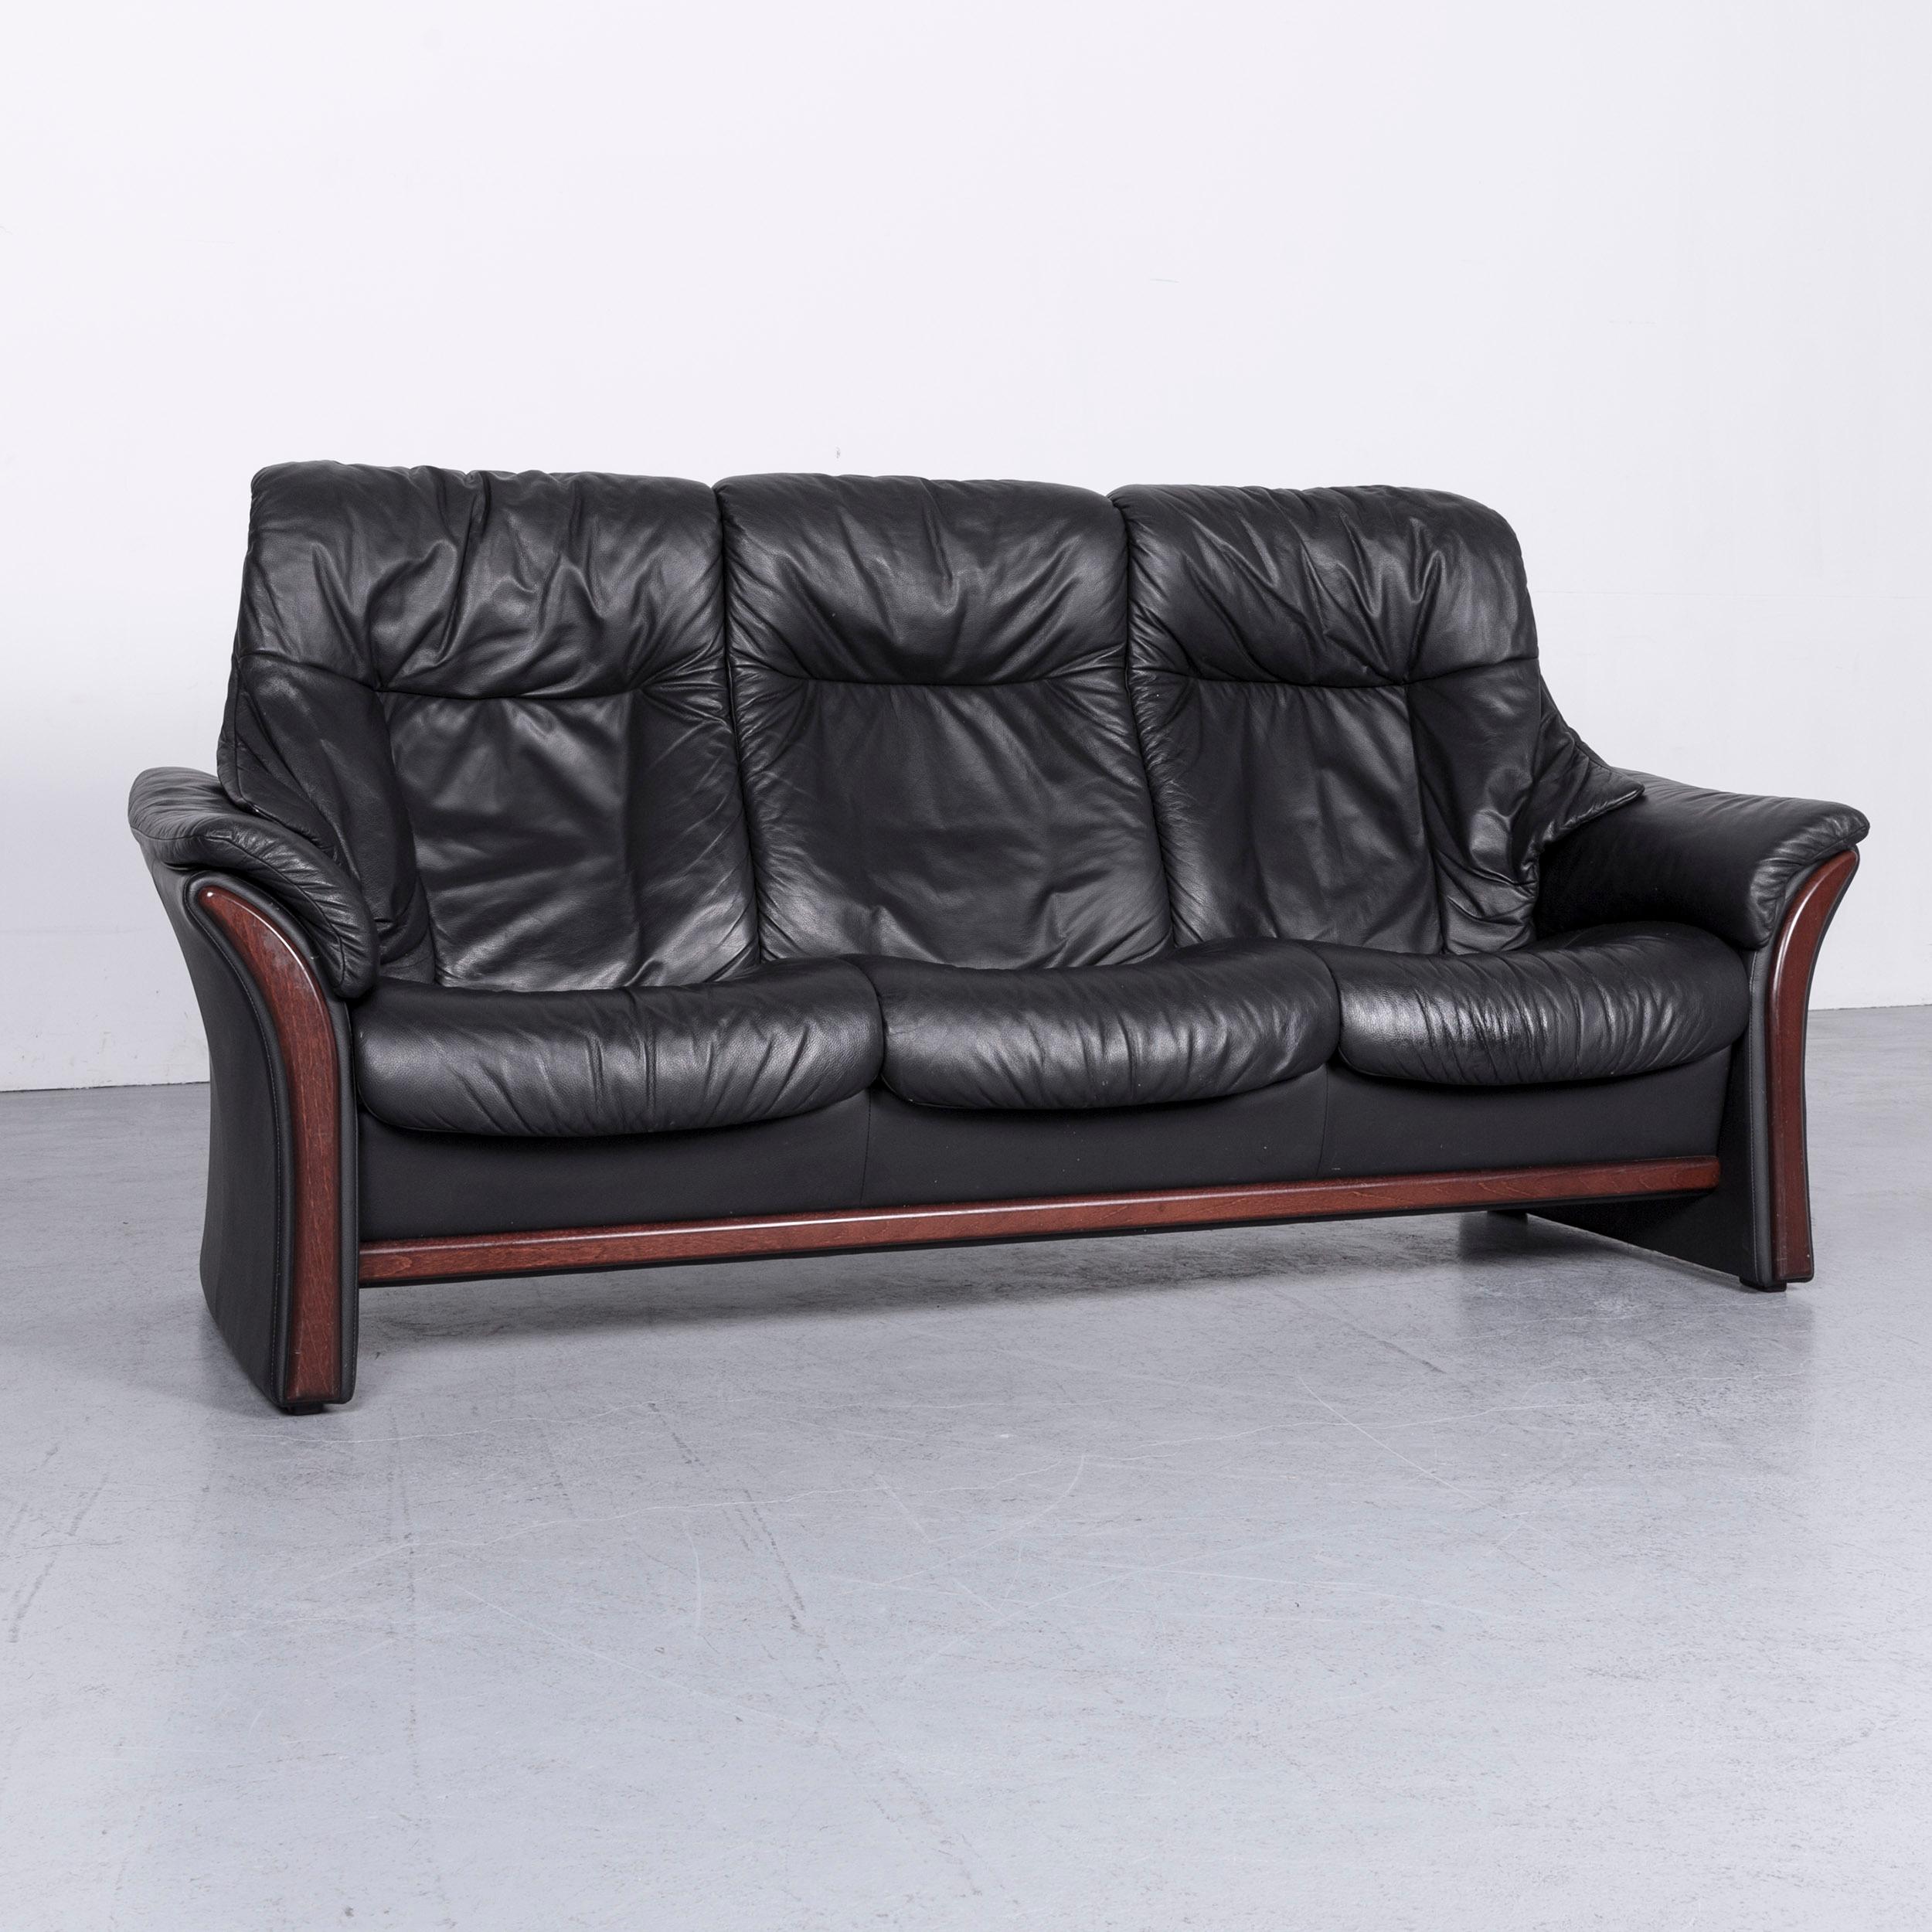 We bring to you an Ekornes Stressless soul relax sofa black leather TV recliner two-seat.